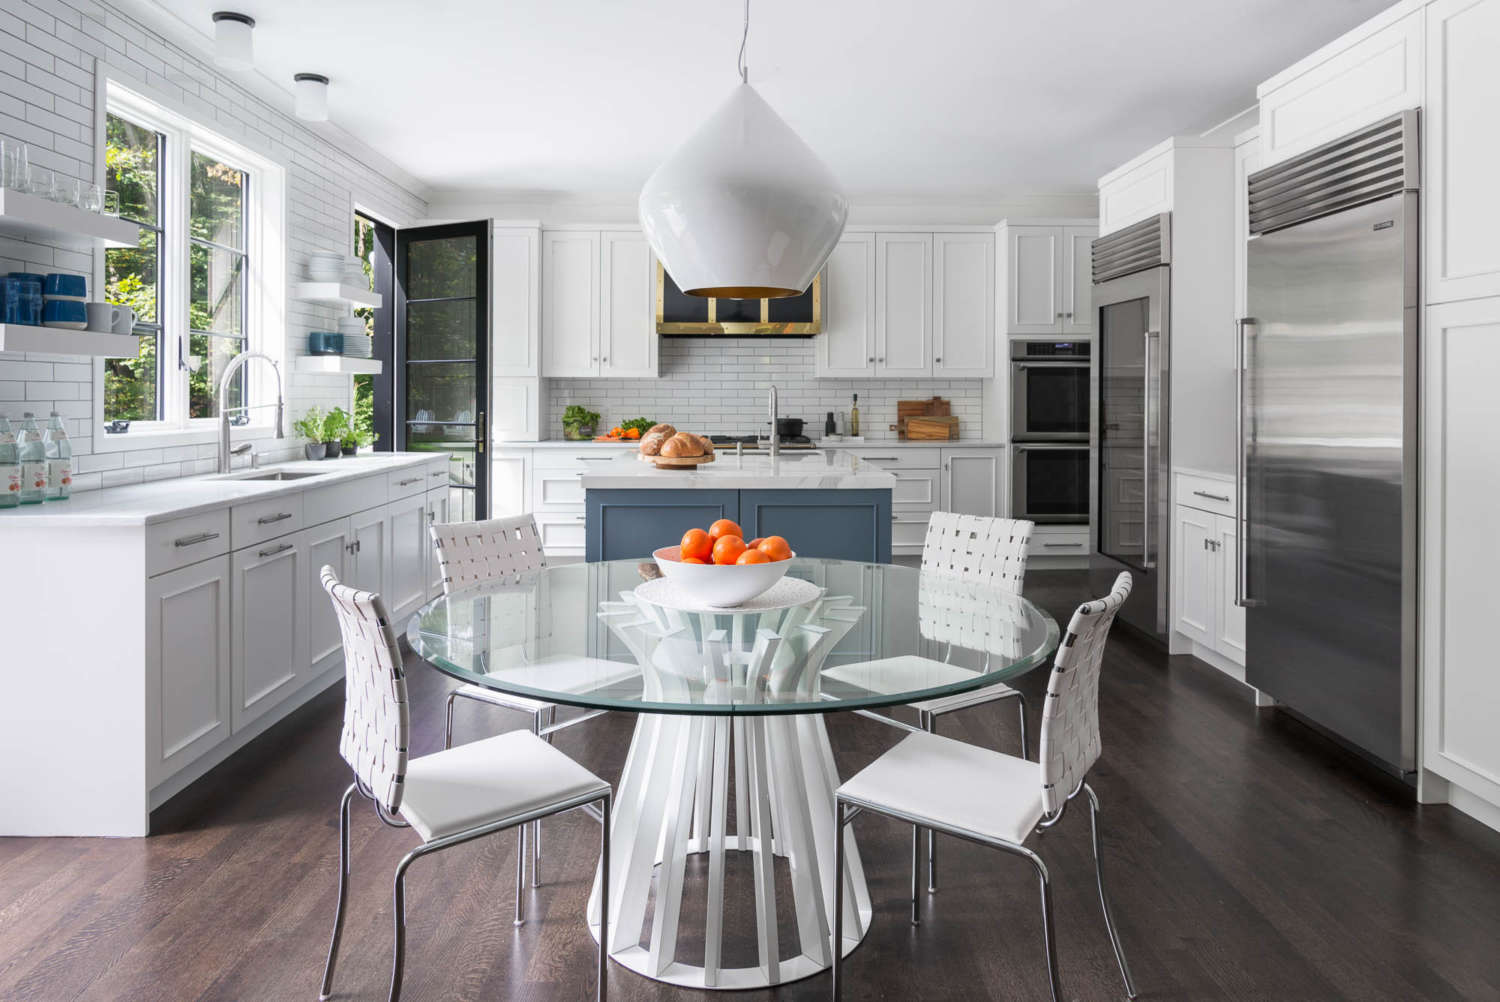 Highly functional kitchen features painted custom cabinetry by Bilotta, white Neolith Classtone countertops and a white subway tile backsplash as a backdrop for bold accents.